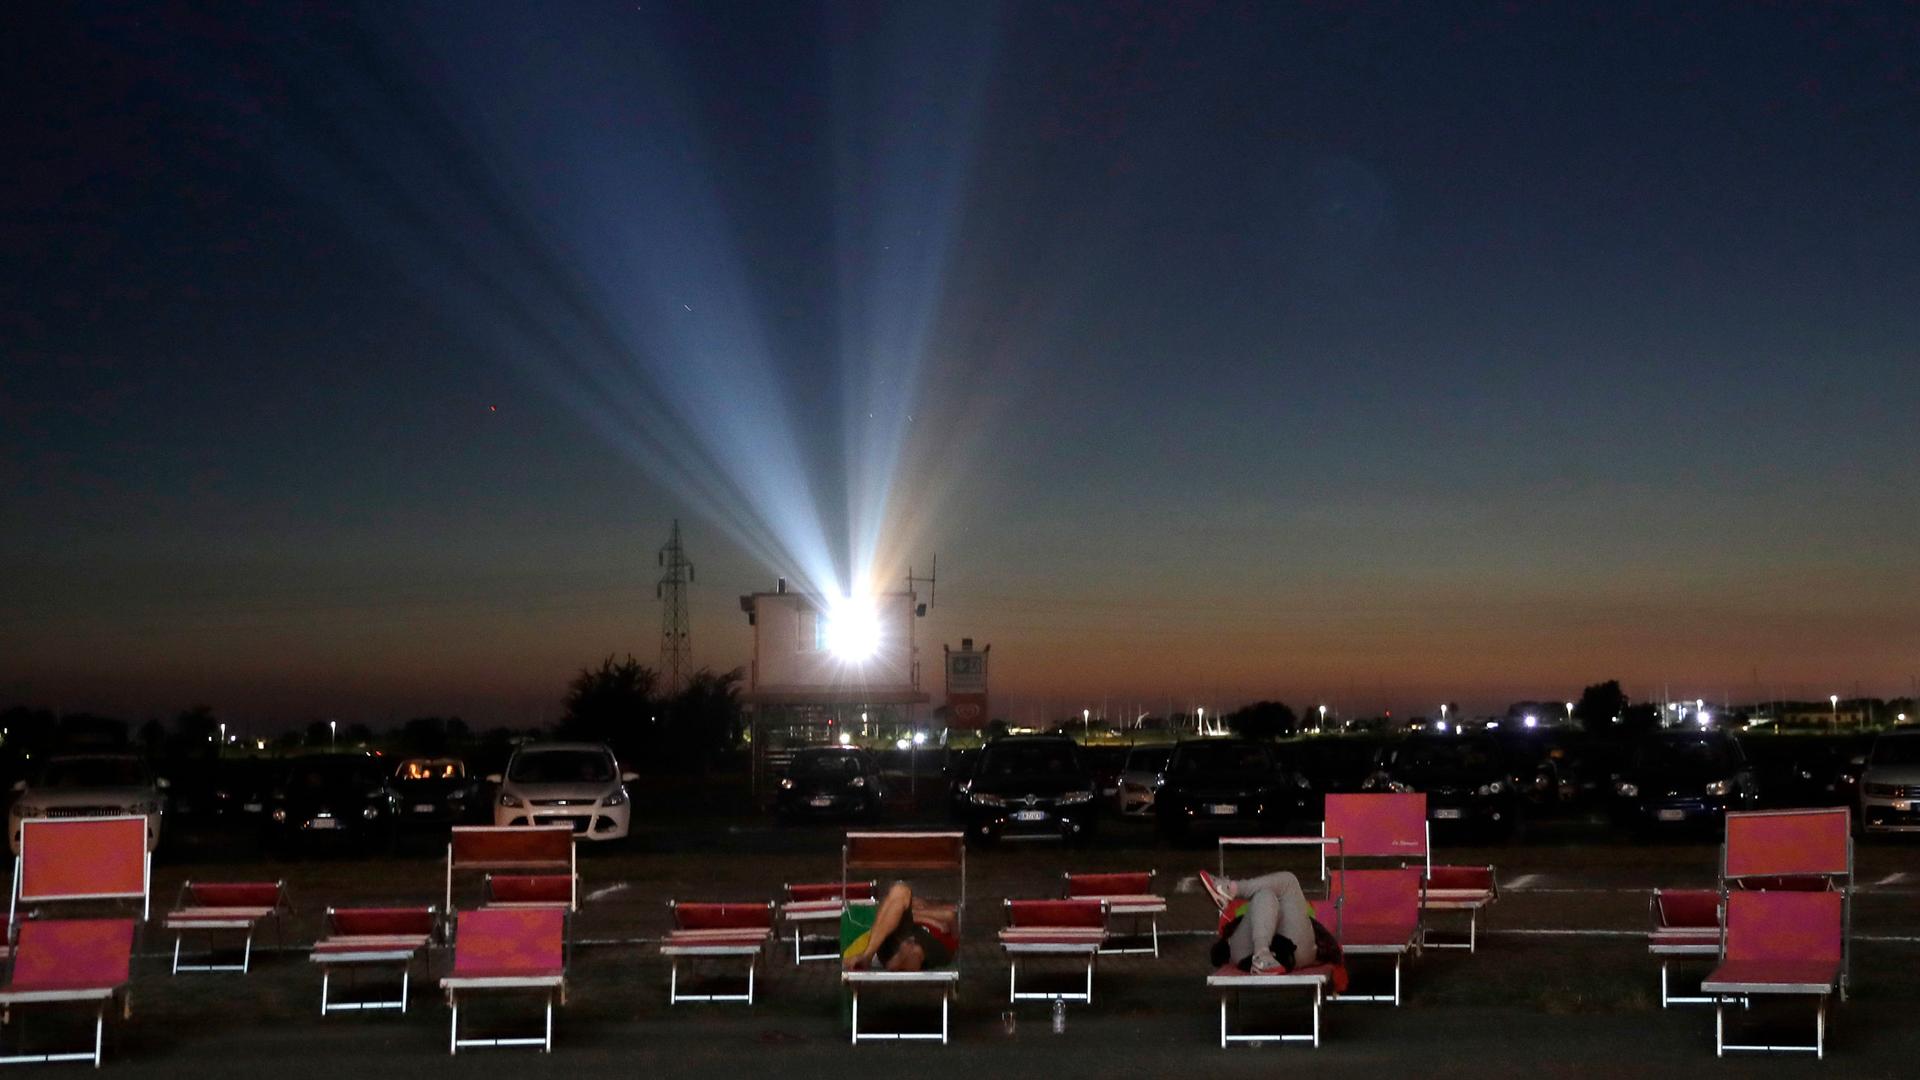 Several rows of outdoor seating are shown with cars in the distance and a movie project shining bright in the distance.